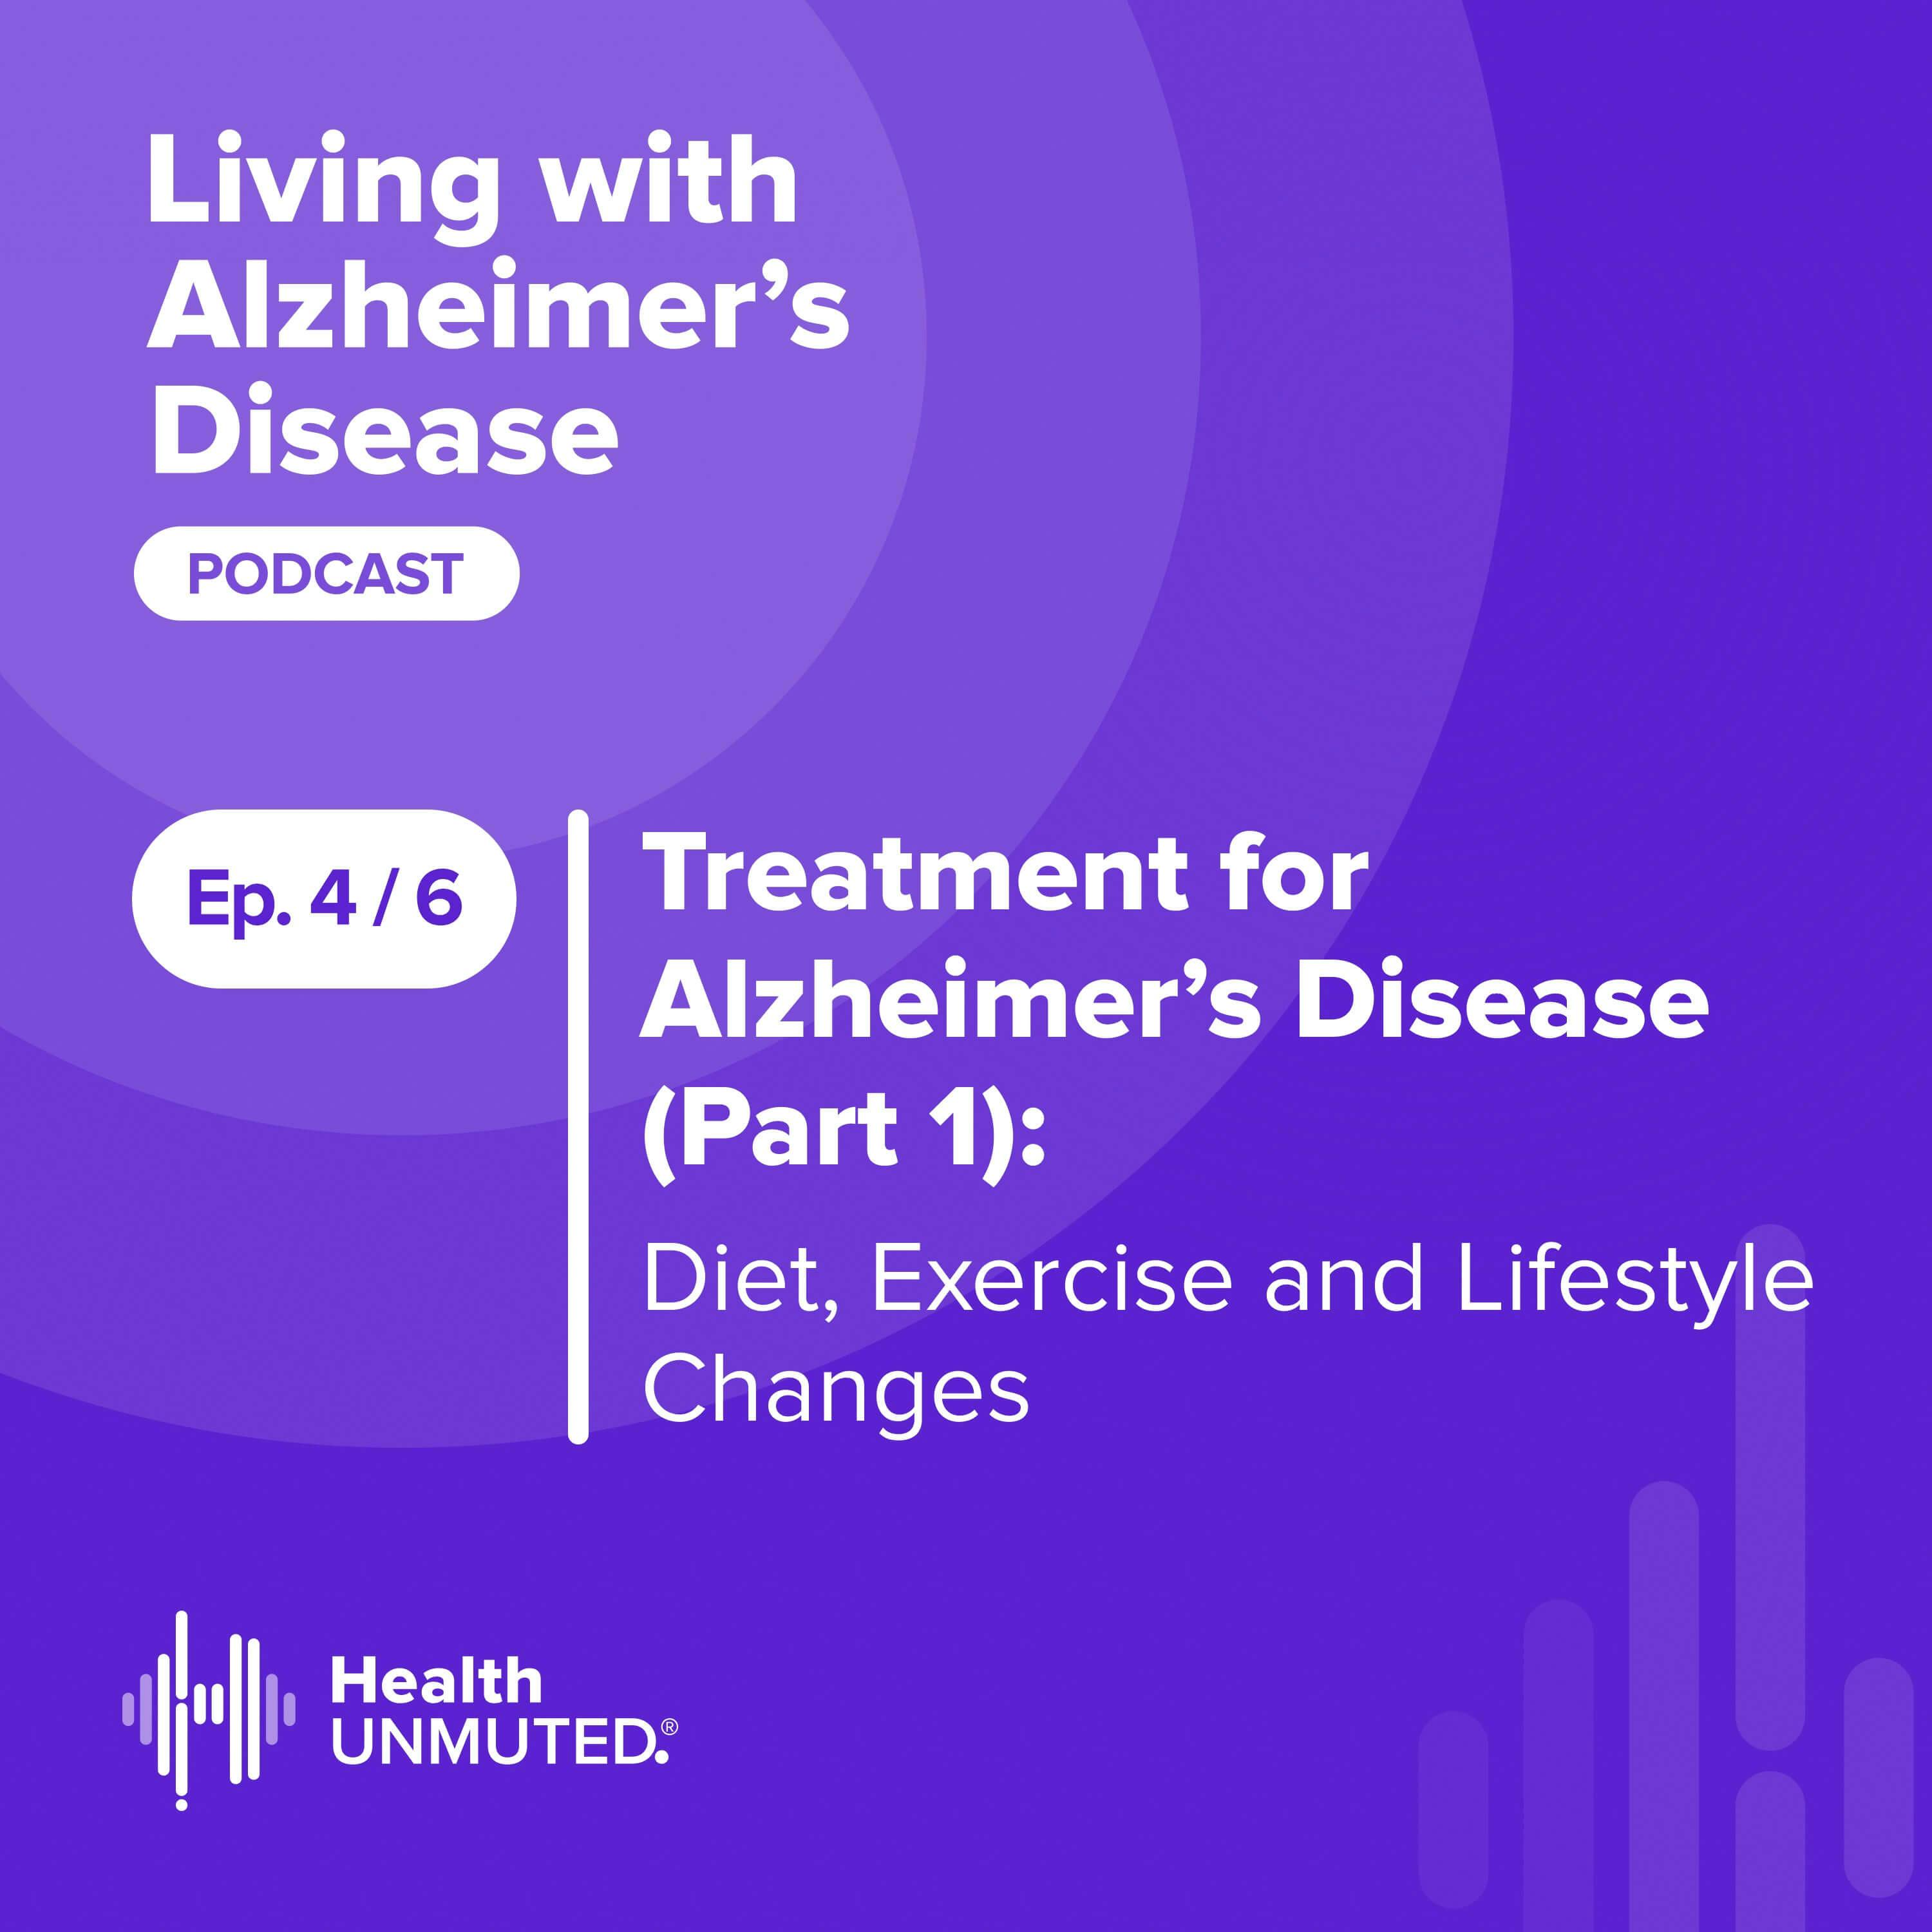 Ep 4: Treatment for Alzheimer’s Disease (Part 1): Diet, Exercise and Lifestyle Changes